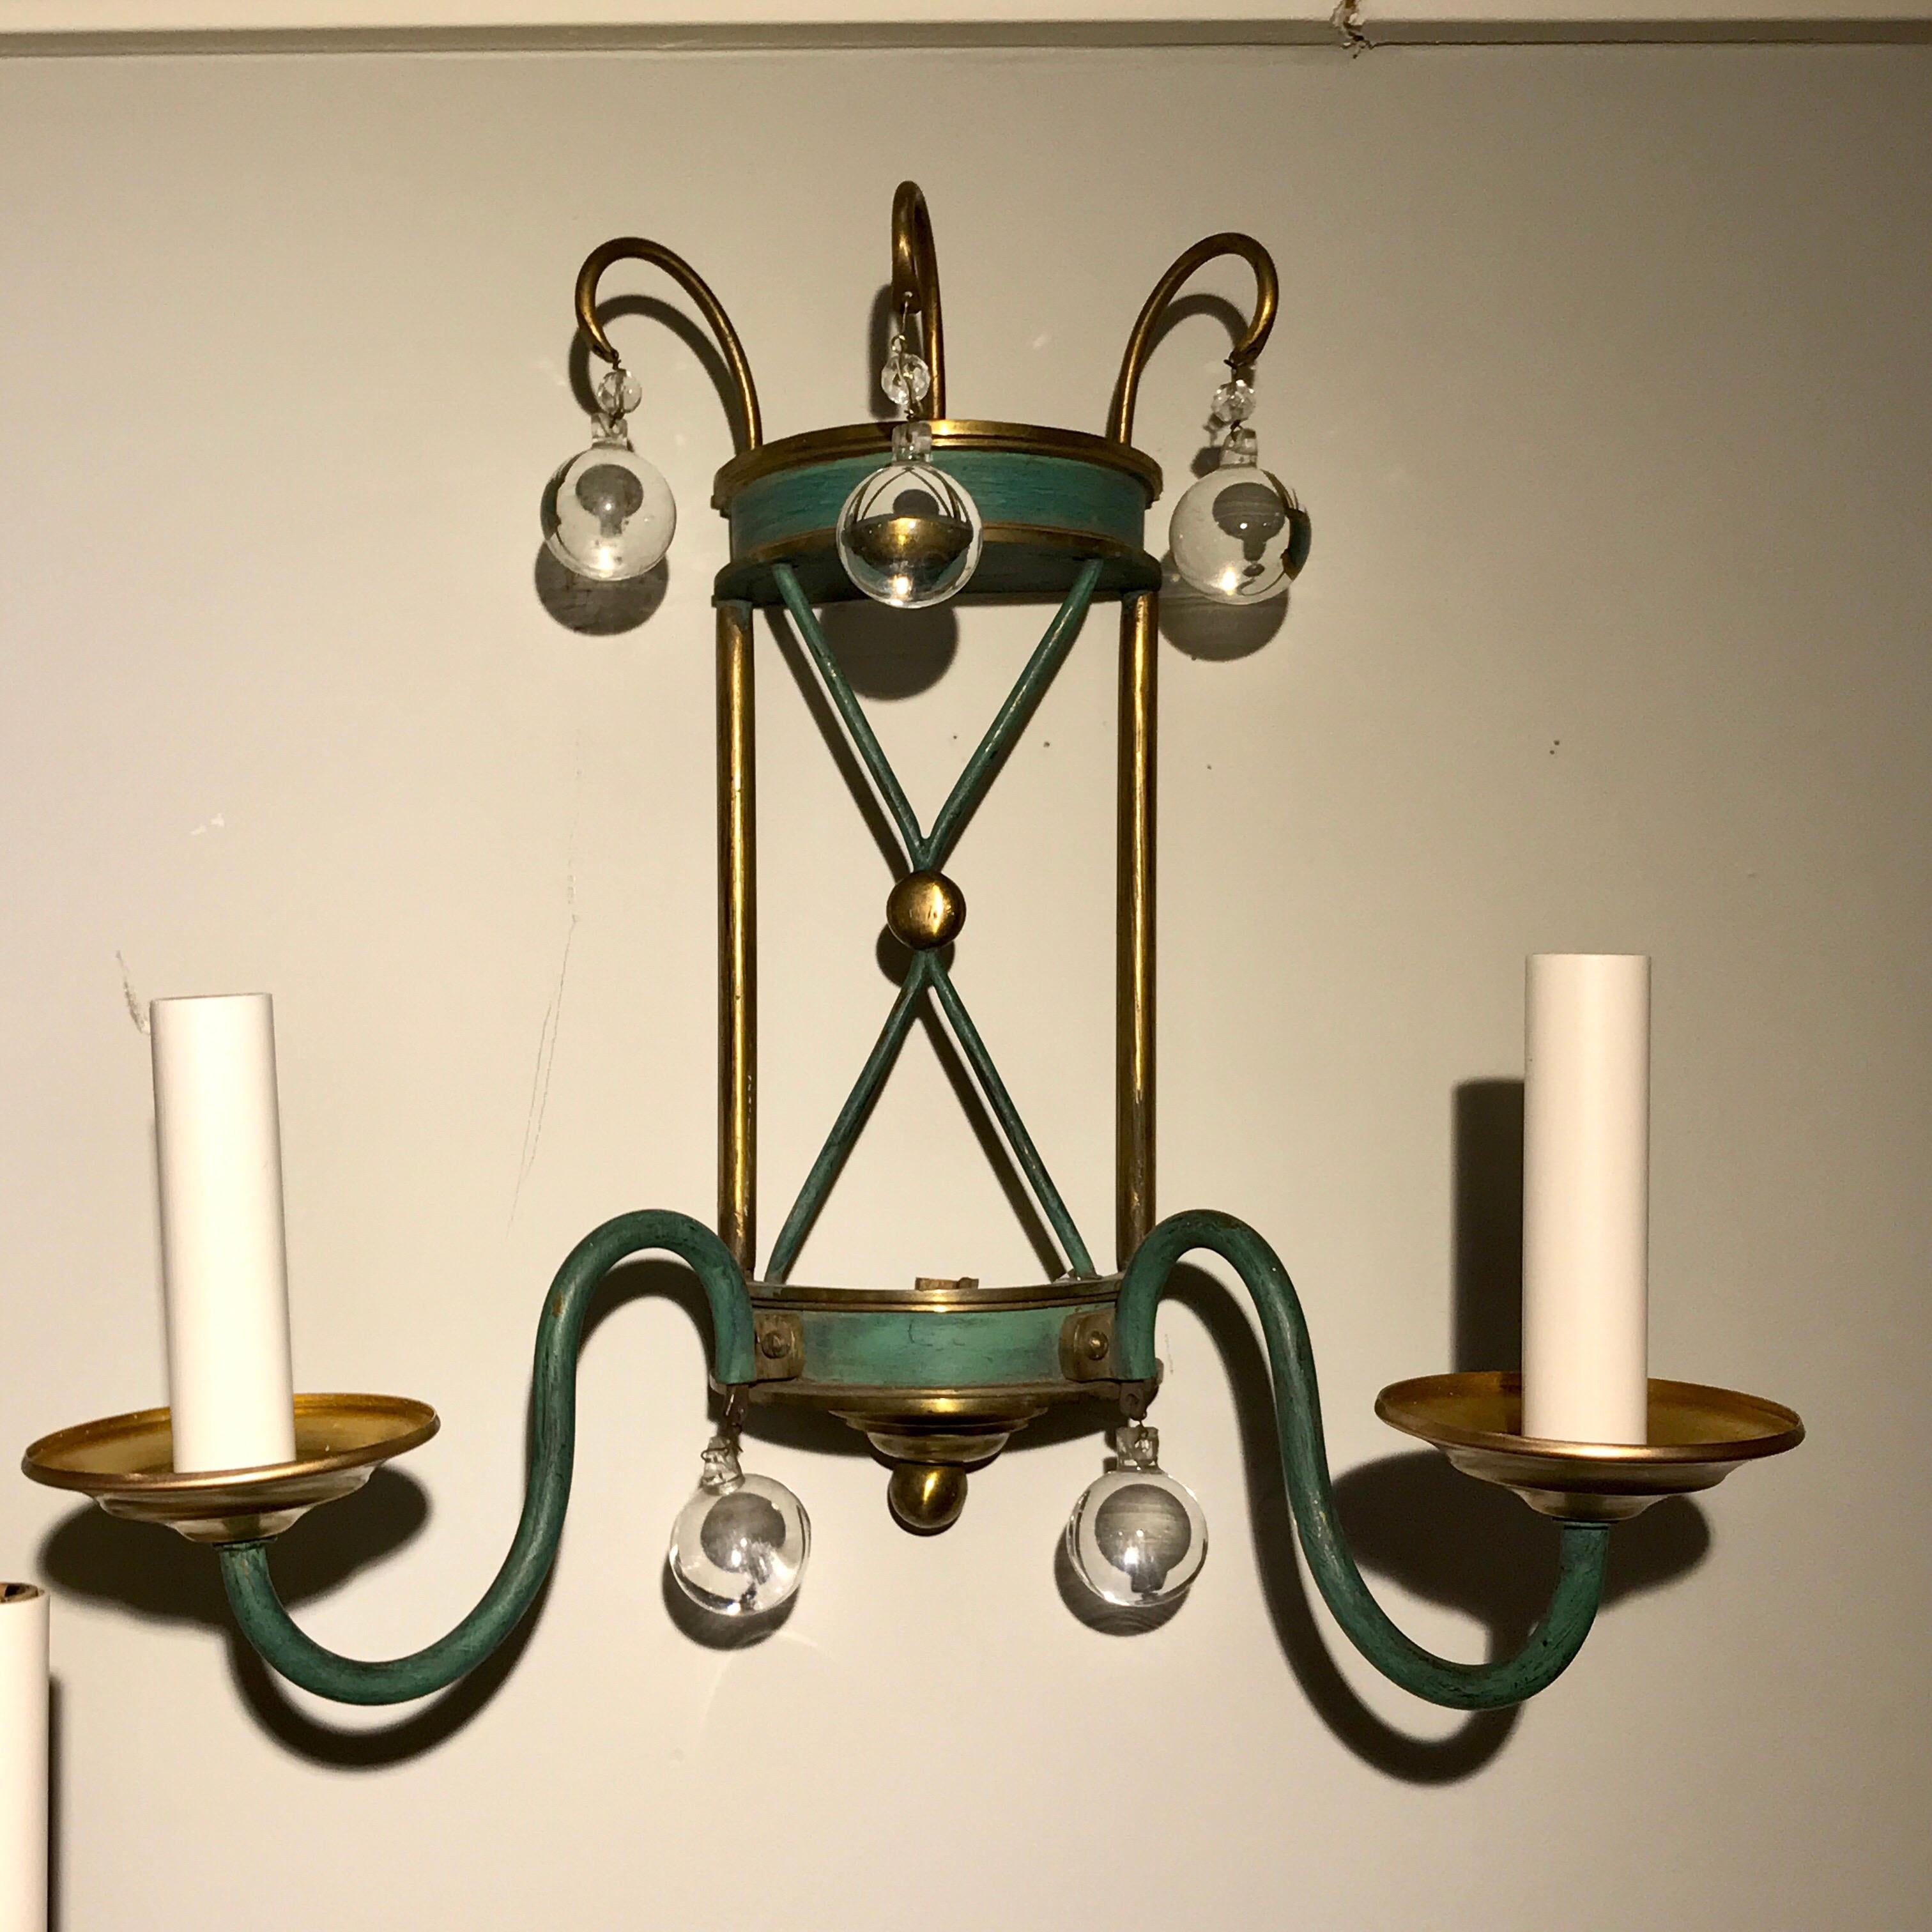 Pair of French modern wall sconces, second pair available, each one with two lights and crystal spheres, in brass and verdigris patina. Newly electrified.